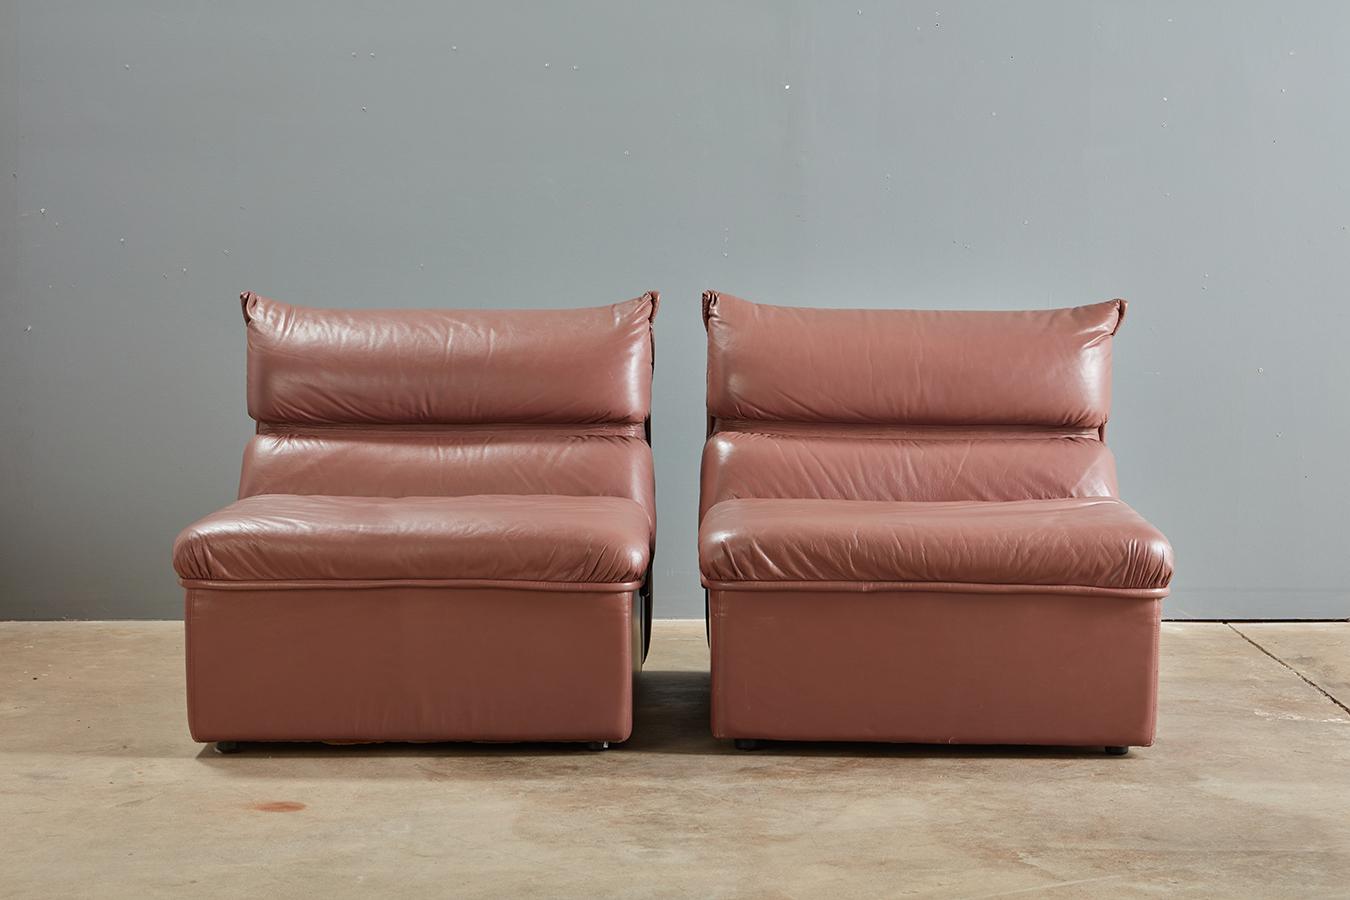 A pair of leather postmodern lounge chairs by Guido Faleschini, I4 Mariani For Pace Collection.

Original buttery soft leather in an uncommon sophisticated neutral; I would call this color a brown in the realm of a chocolate milk tone with a